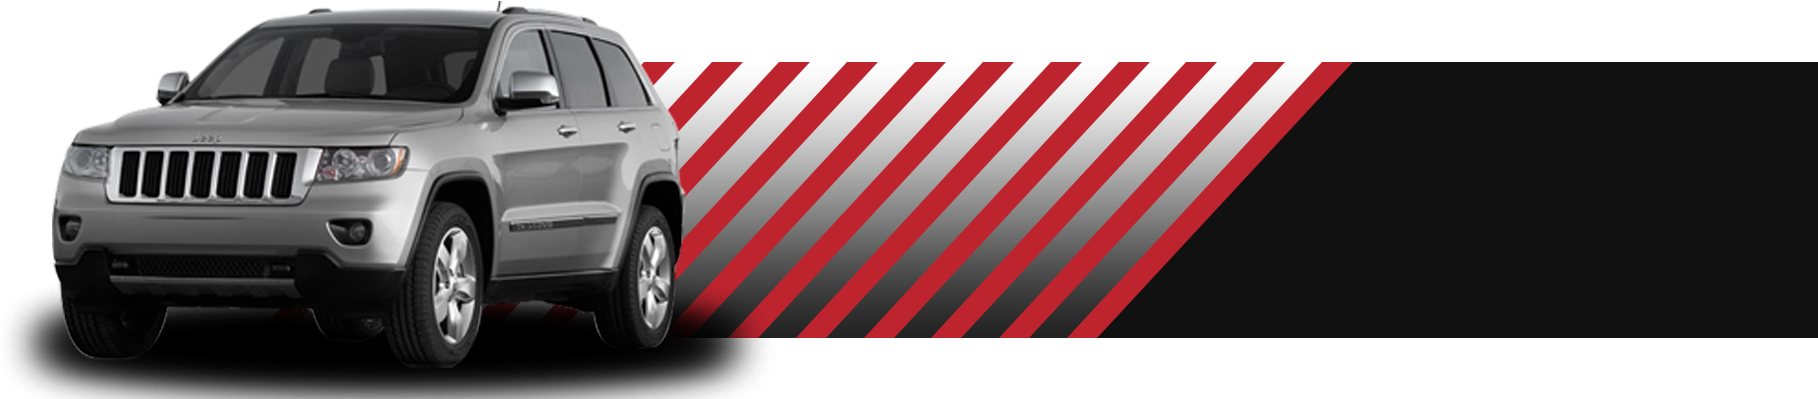 S U V_with_ Red_ Stripes_ Background PNG